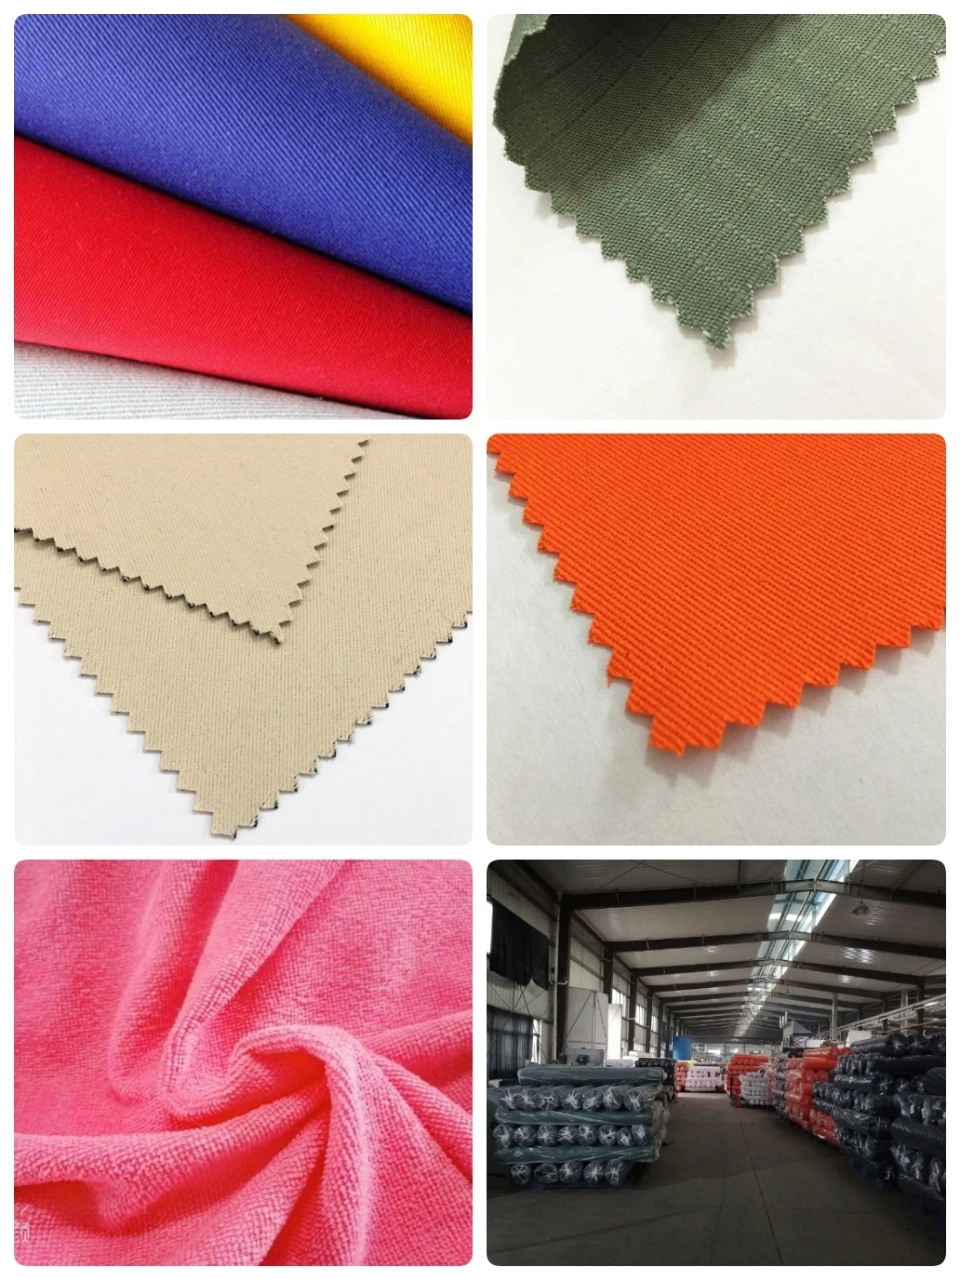 100 Polyester Textile 57/58&quot; Width 110-250GSM Proban Fr / Waterproof / Anti-Static Used in Industy / Security / Garment / Jacket / Curtain / Sofa as Protection